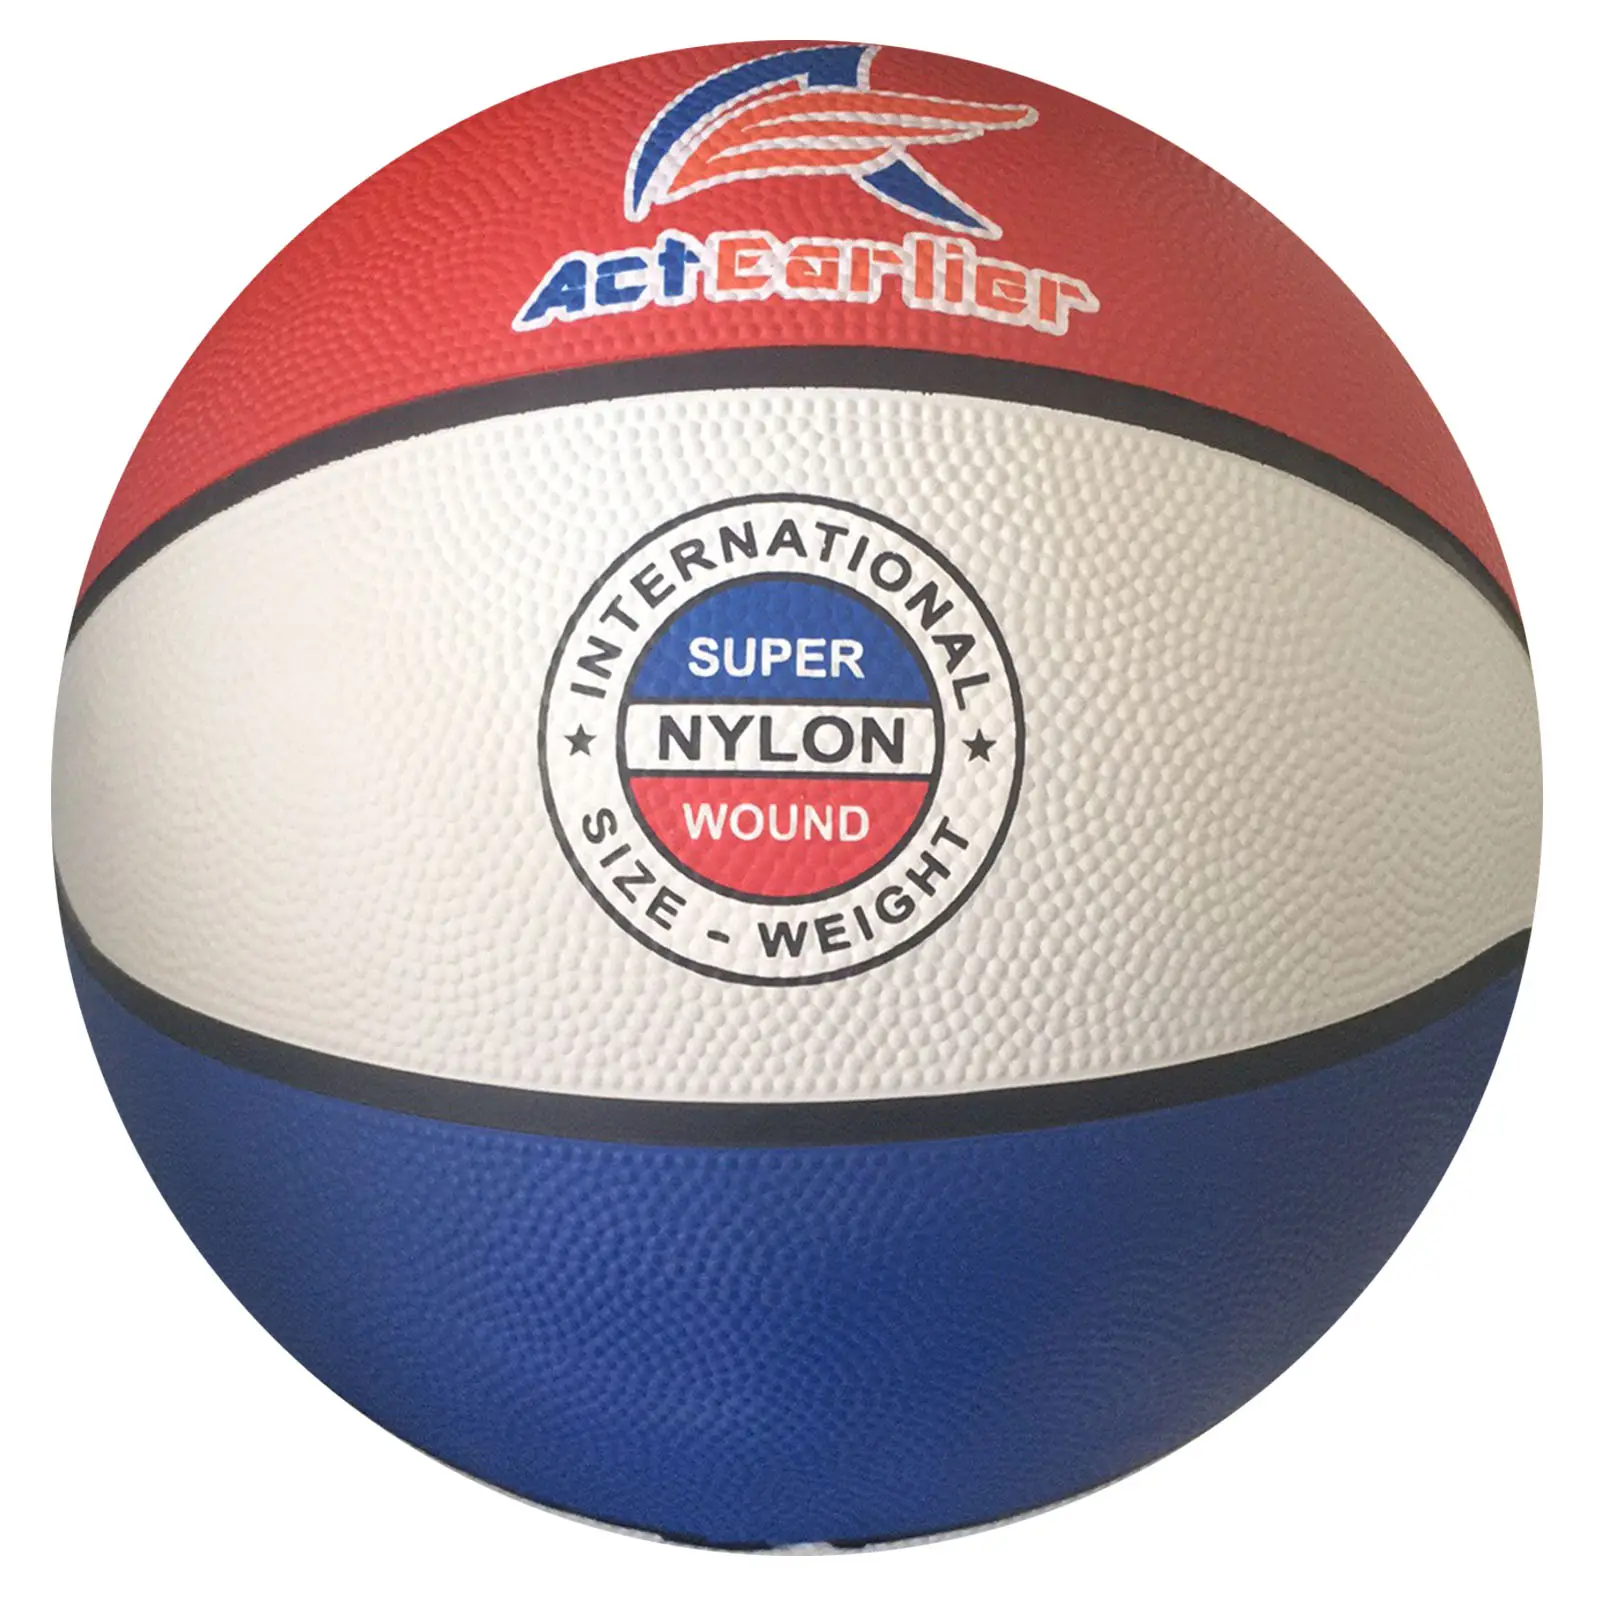 ActEarlier team sports training basketball ball promotional red blue white rubber basketballs size 5 with custom logo